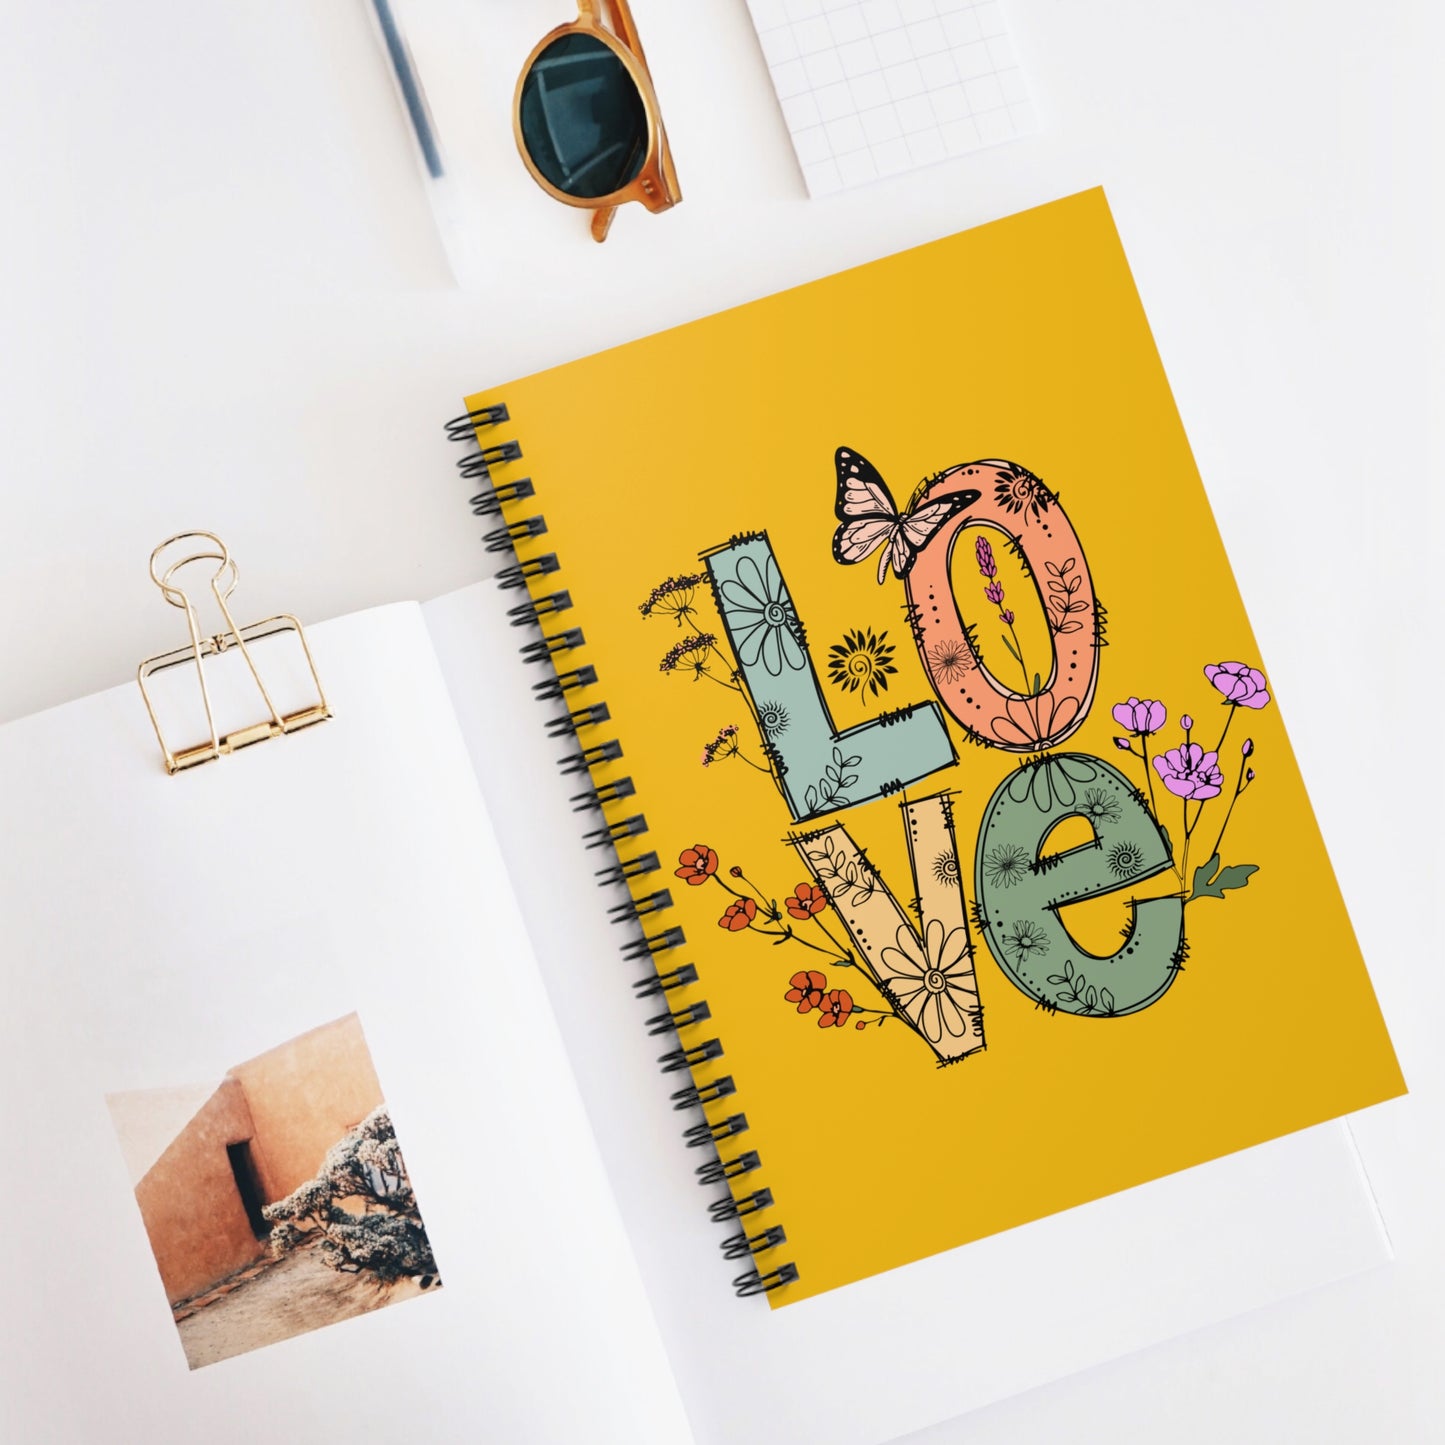 LOVE Flower Doodle: Spiral Notebook - Log Books - Journals - Diaries - and More Custom Printed by TheGlassyLass